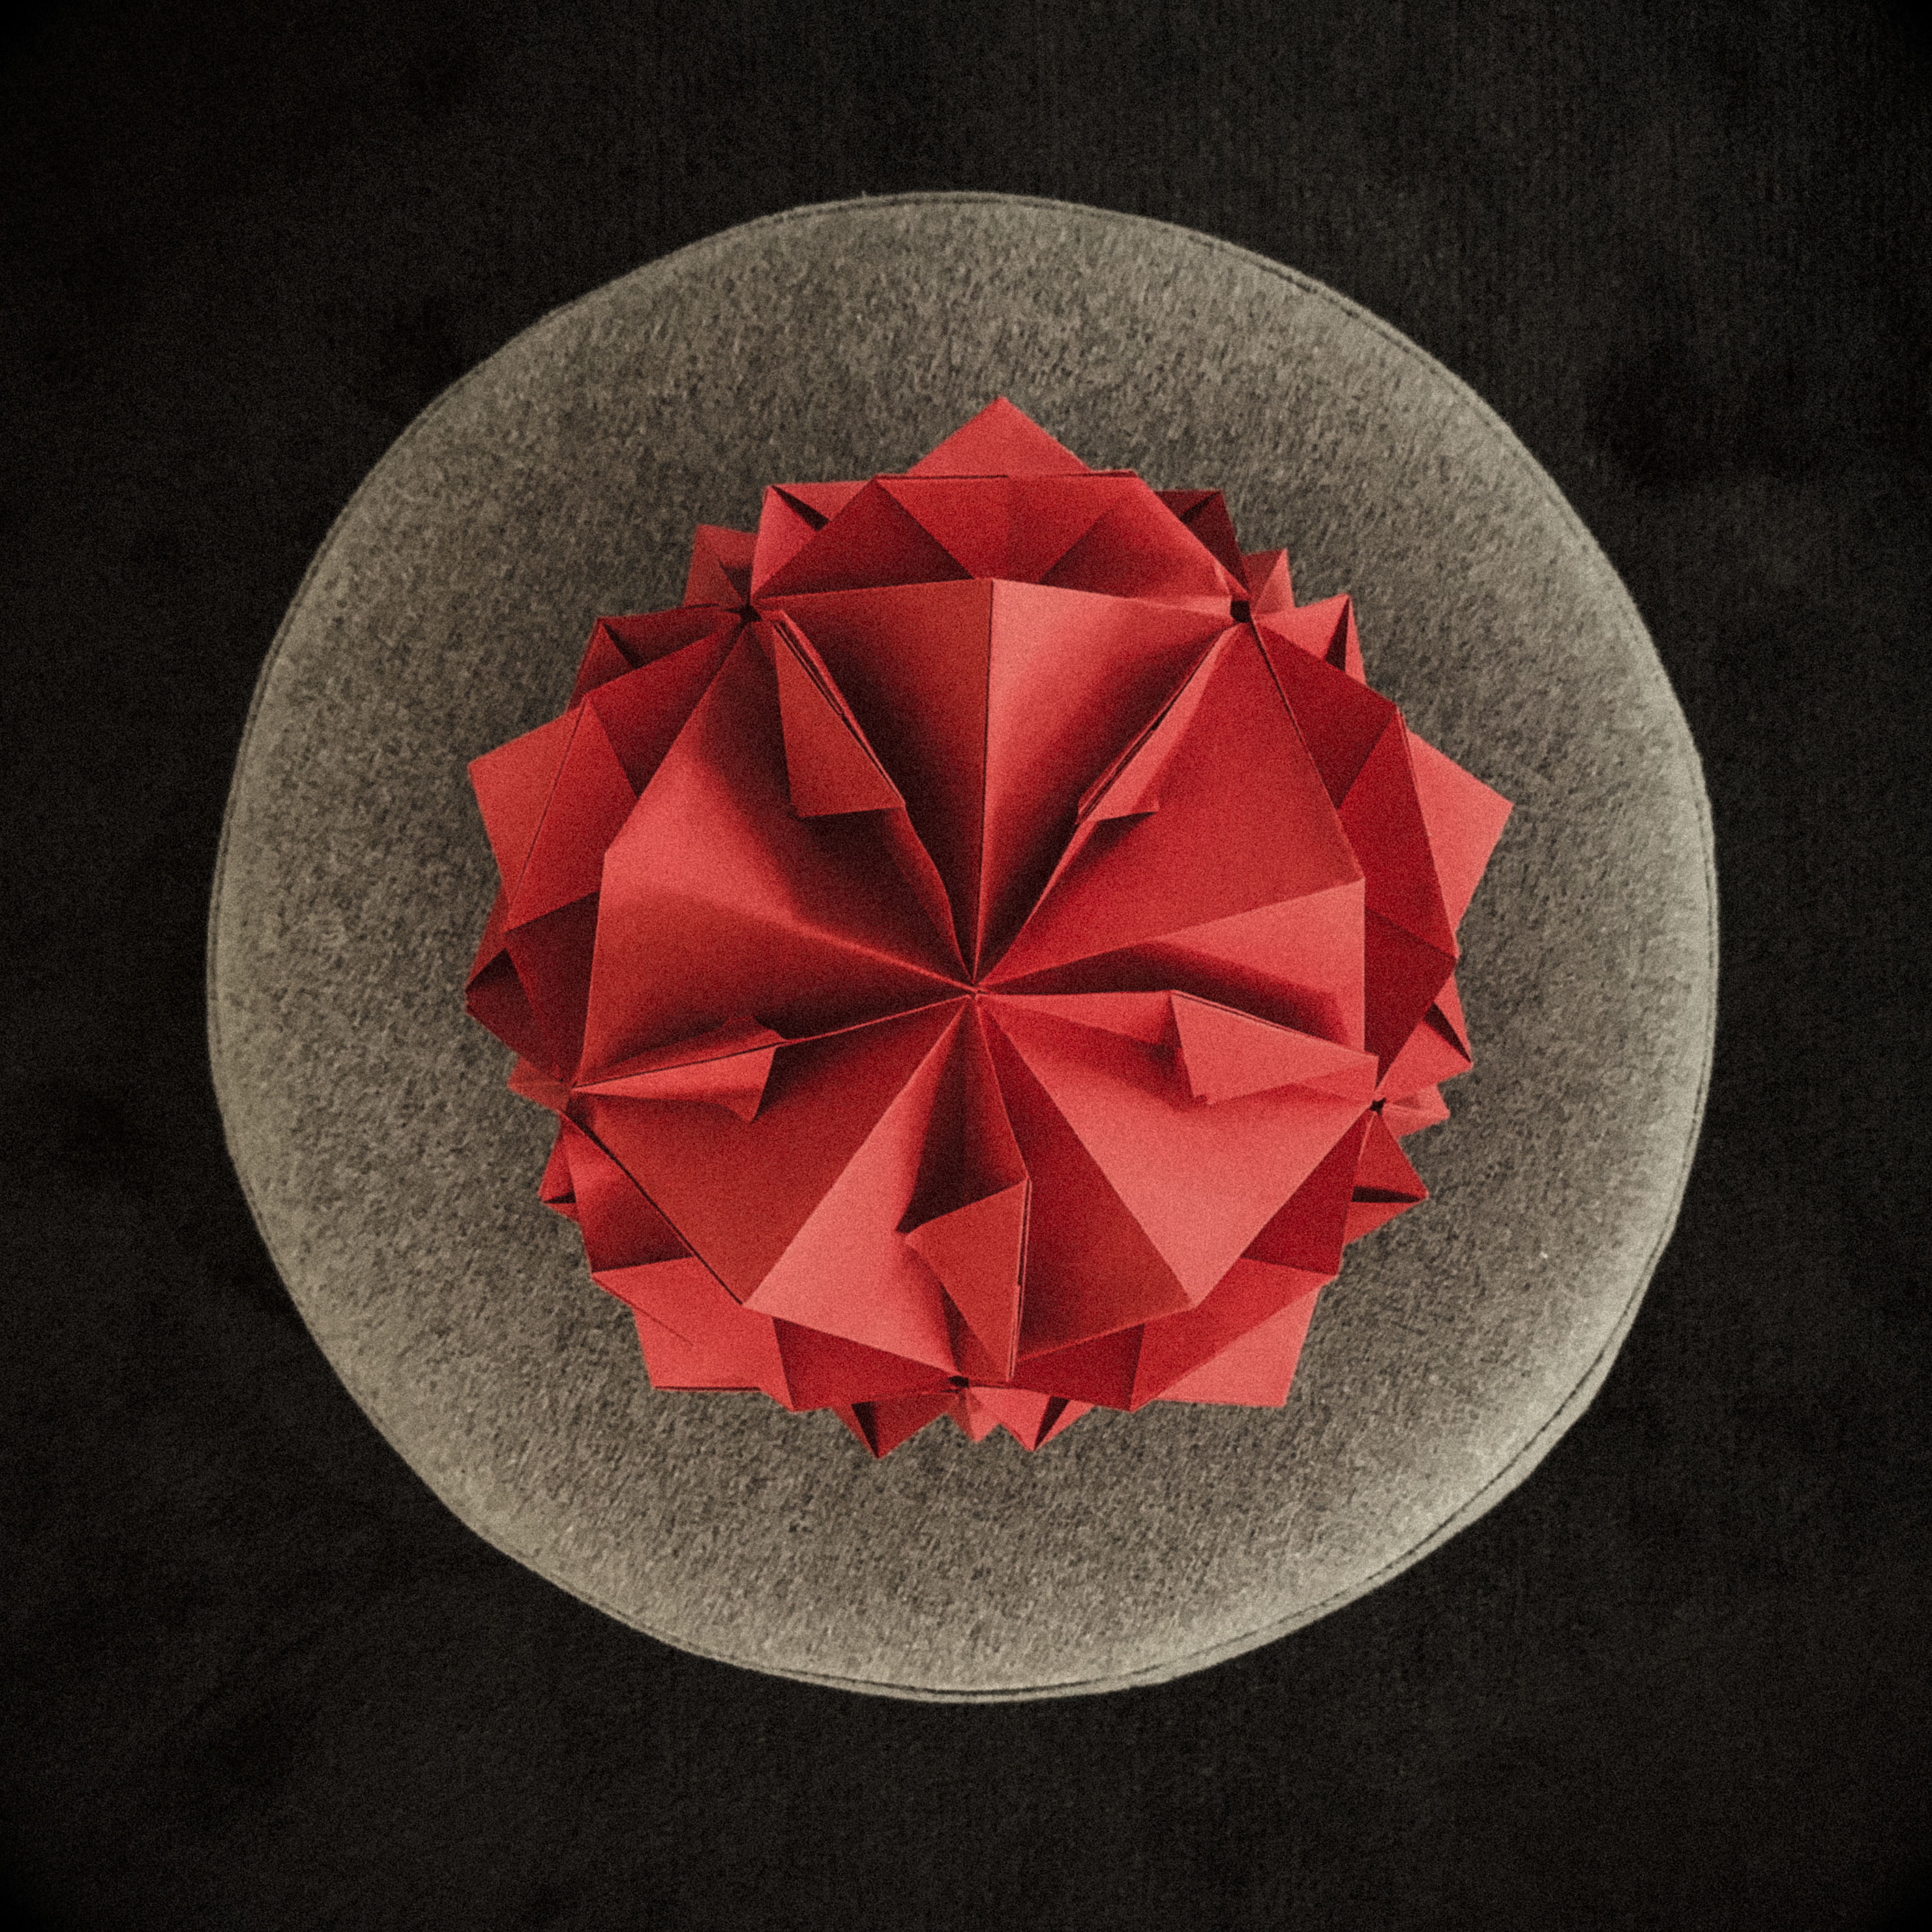 Name: Luke. Prize: Shortlist. I made an origami icosahedron for my sister’s birthday present. An icosahedron is a 3D shape with twenty triangular faces. I made the “math” in this photo red and the rest of the image grey so the math would really stand out!